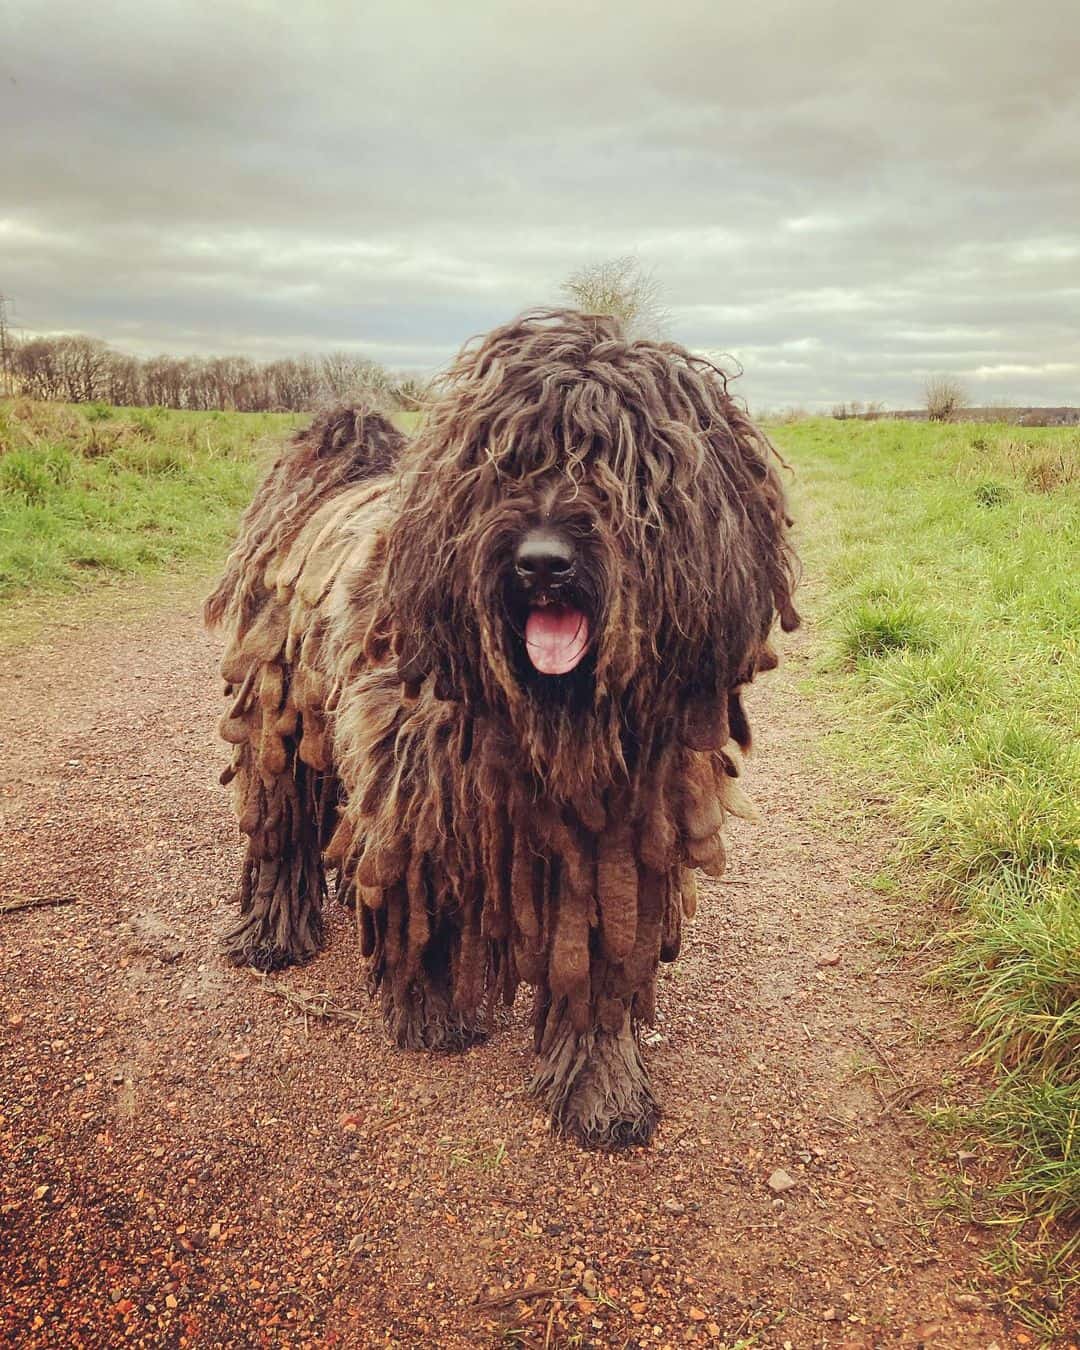 The Bergamasco stands in the field